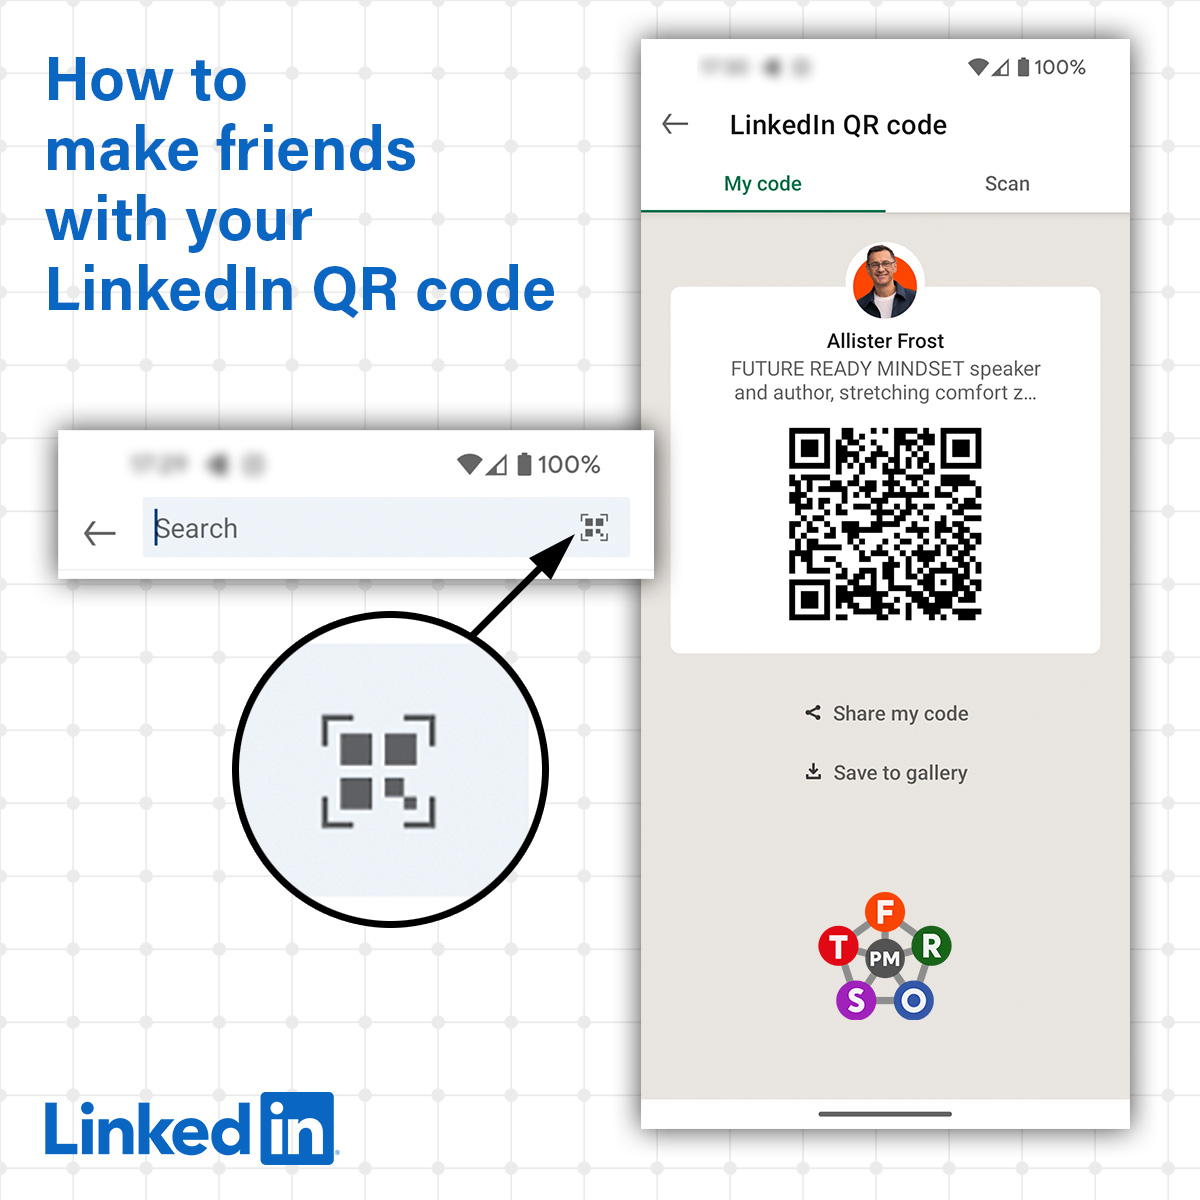 The QR code symbol in the LinkedIn search bar